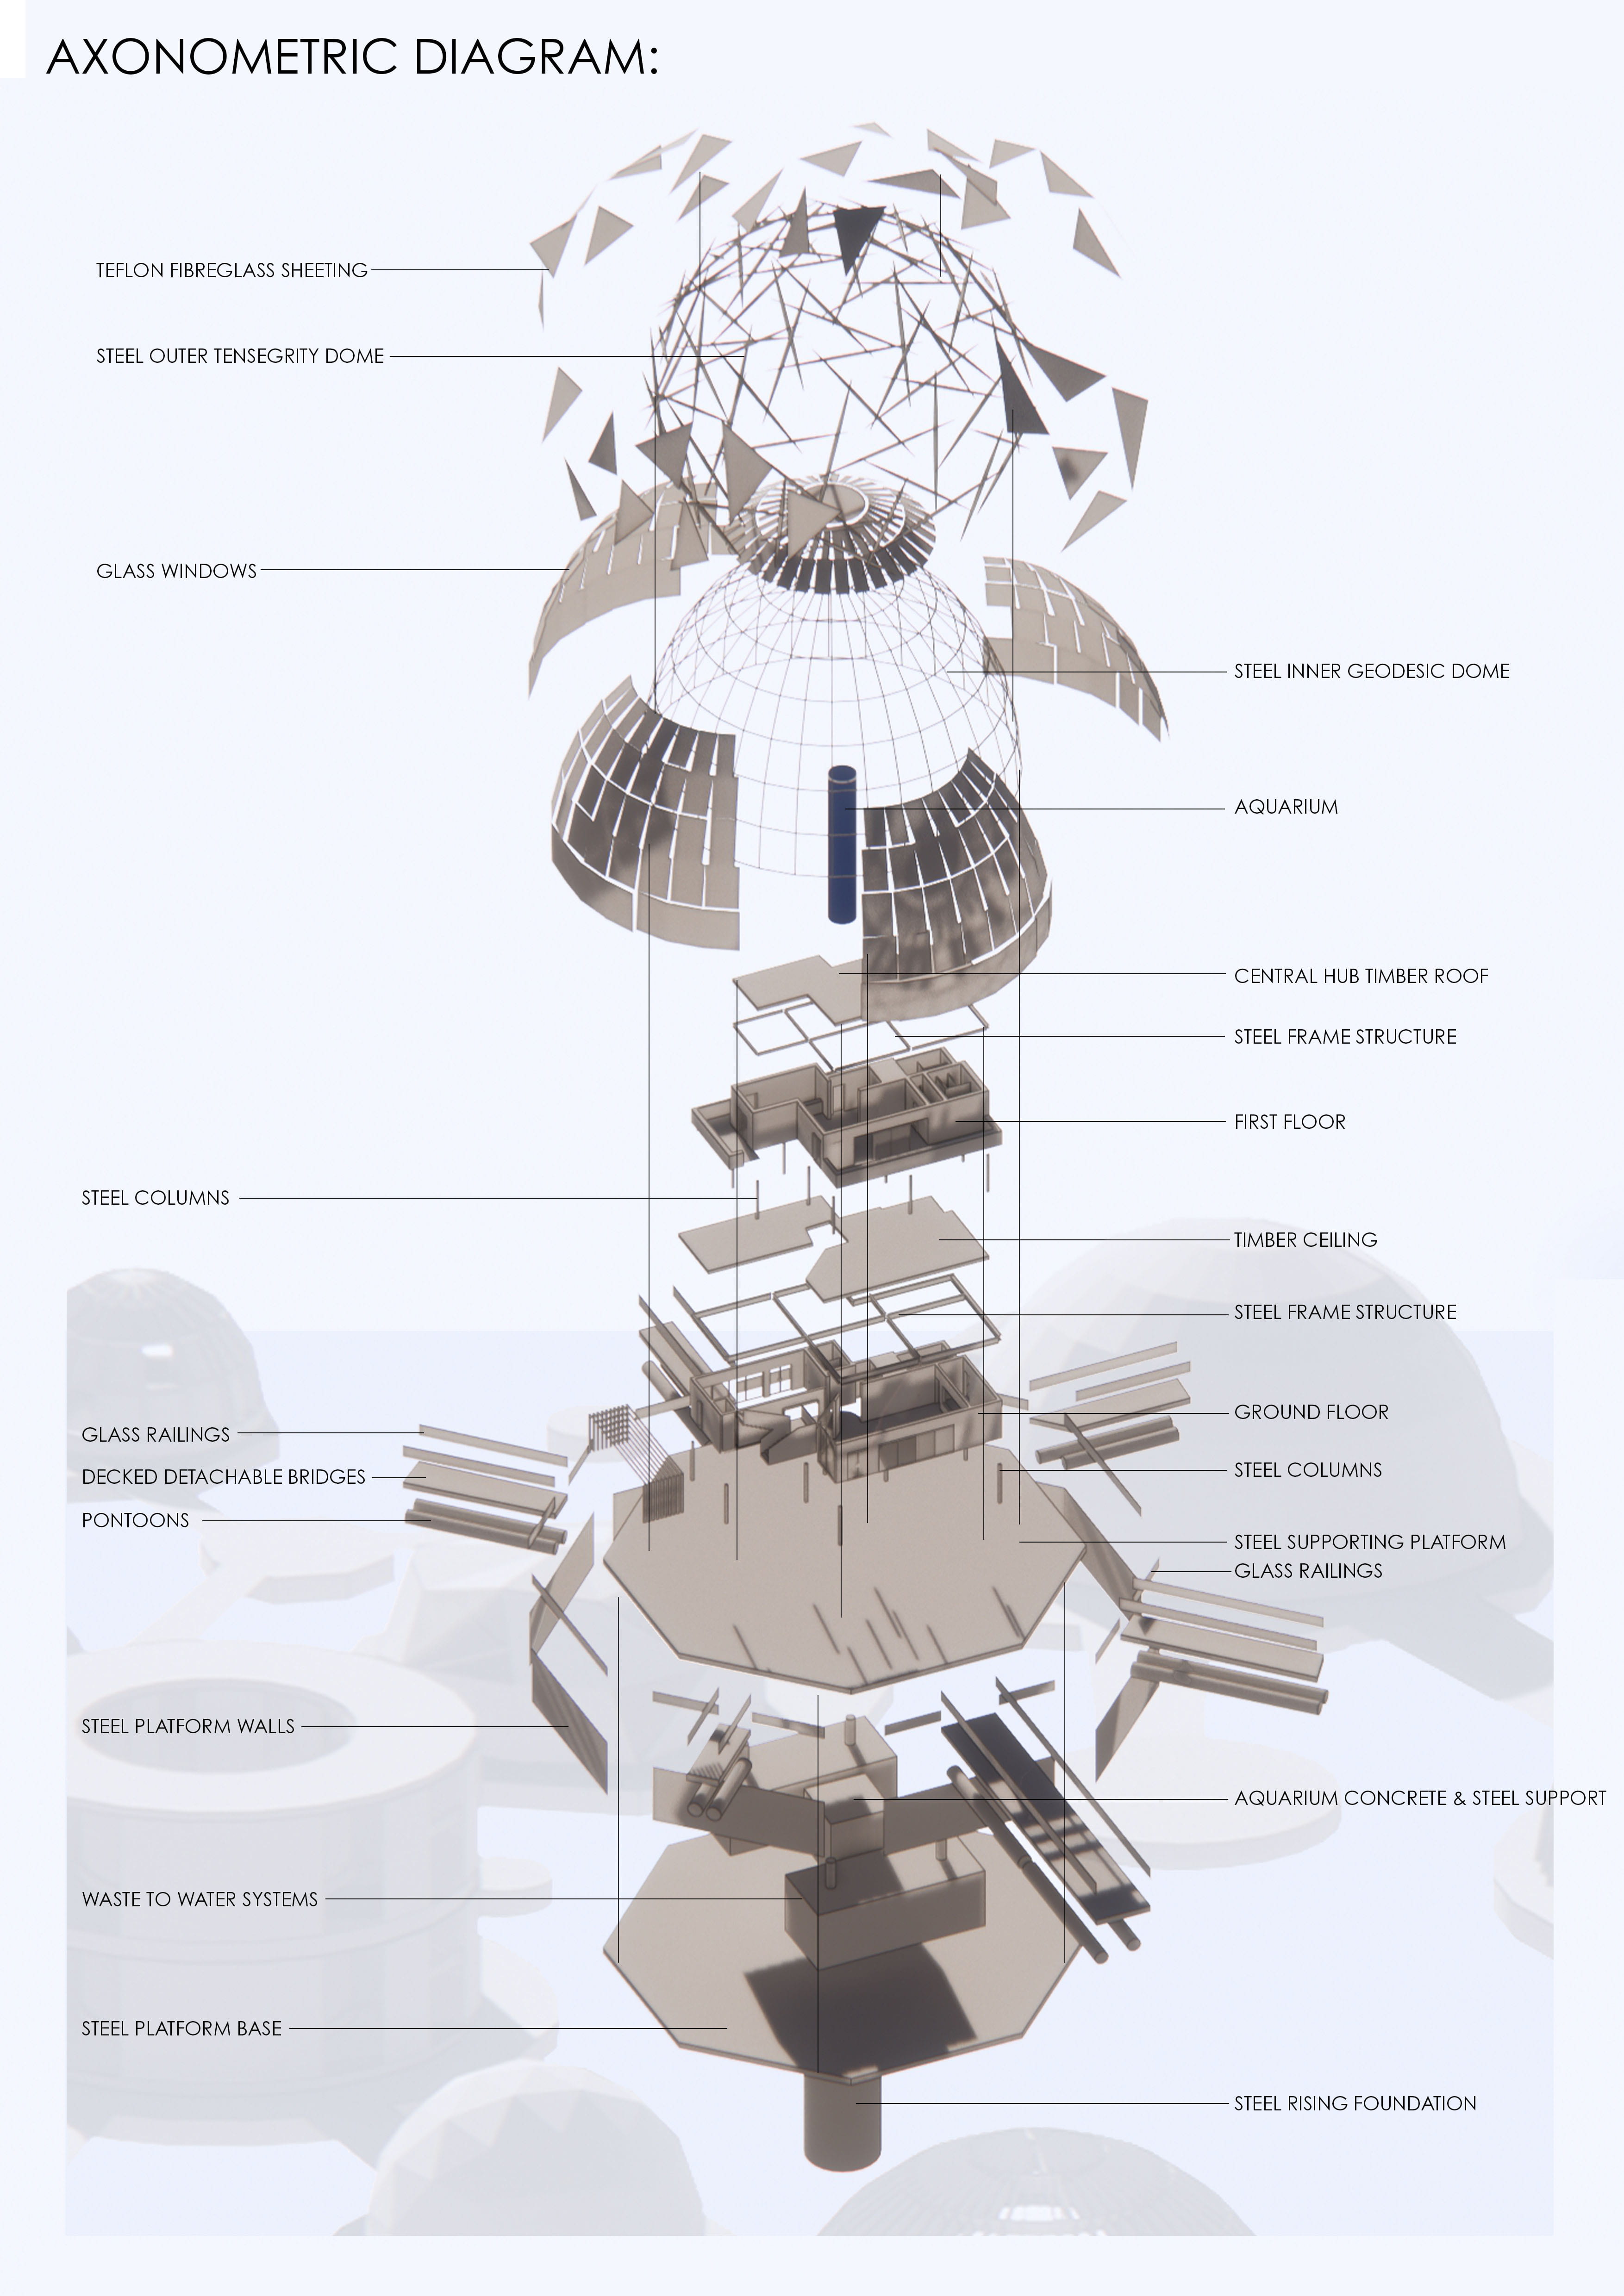 Exploded Axonometric showing how the elements work and fit together